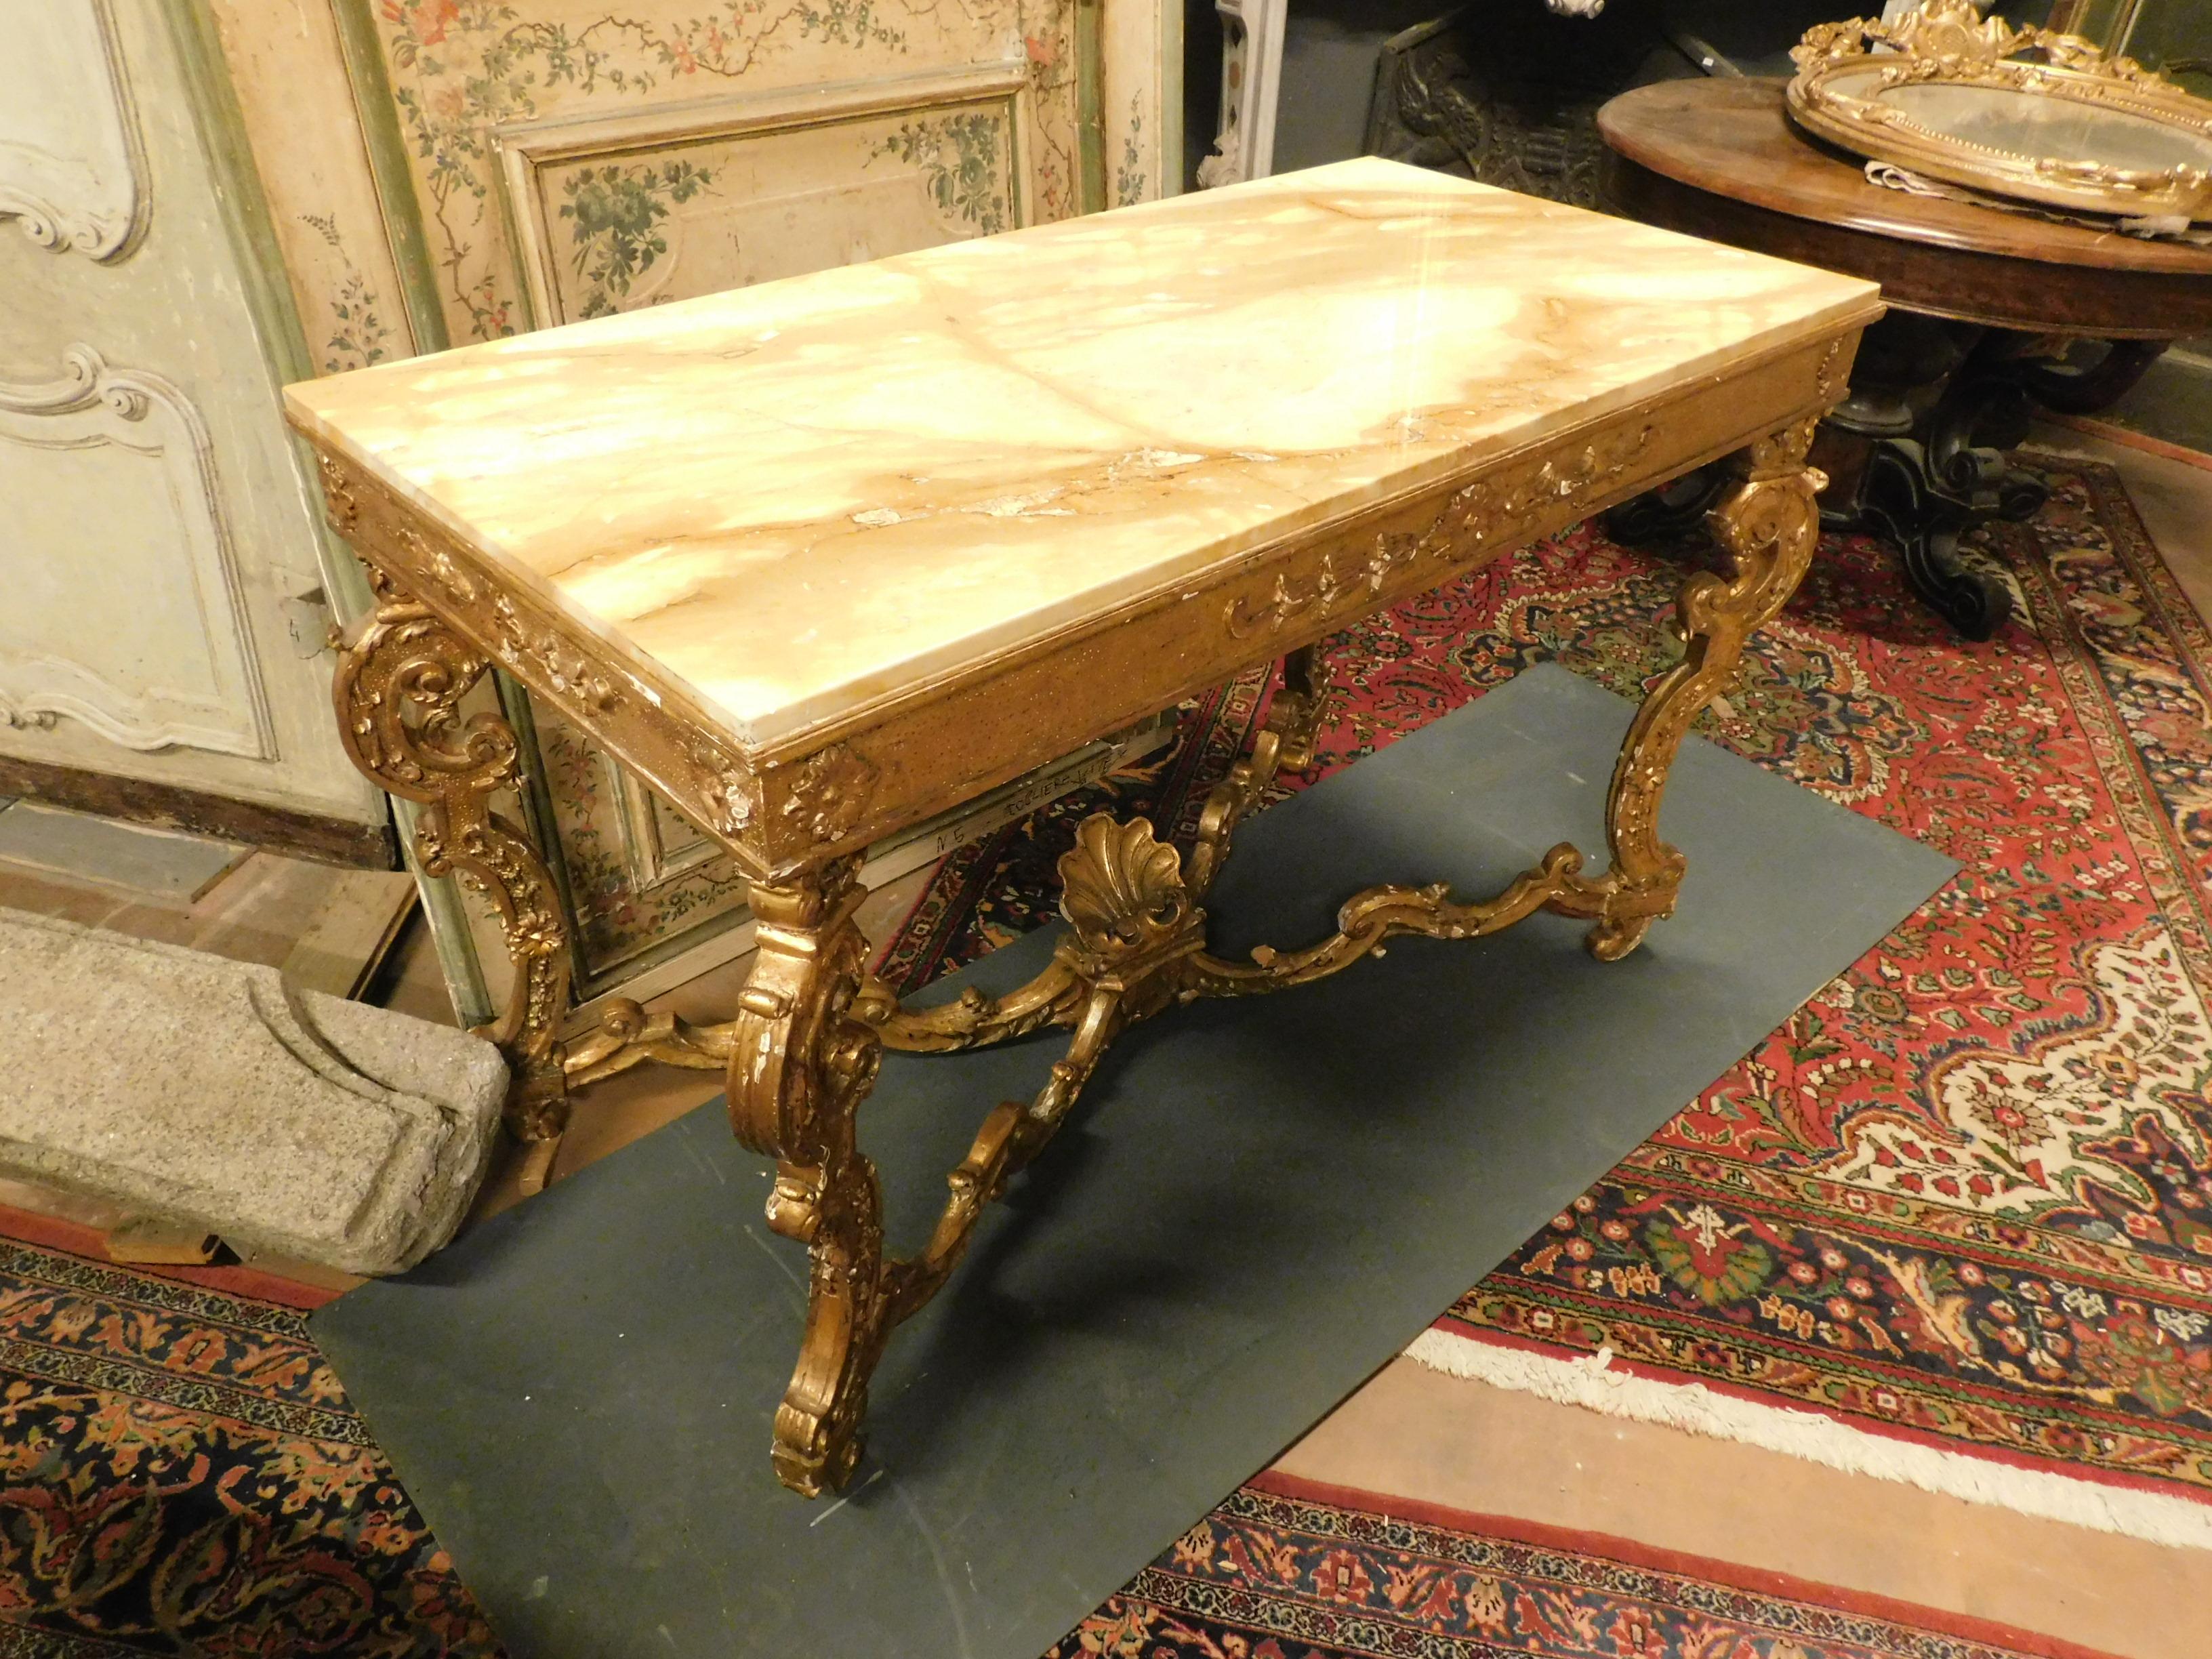 Gilt Antique Wood Golden Console Table with Marble Top, 18th Century Naples, Italy